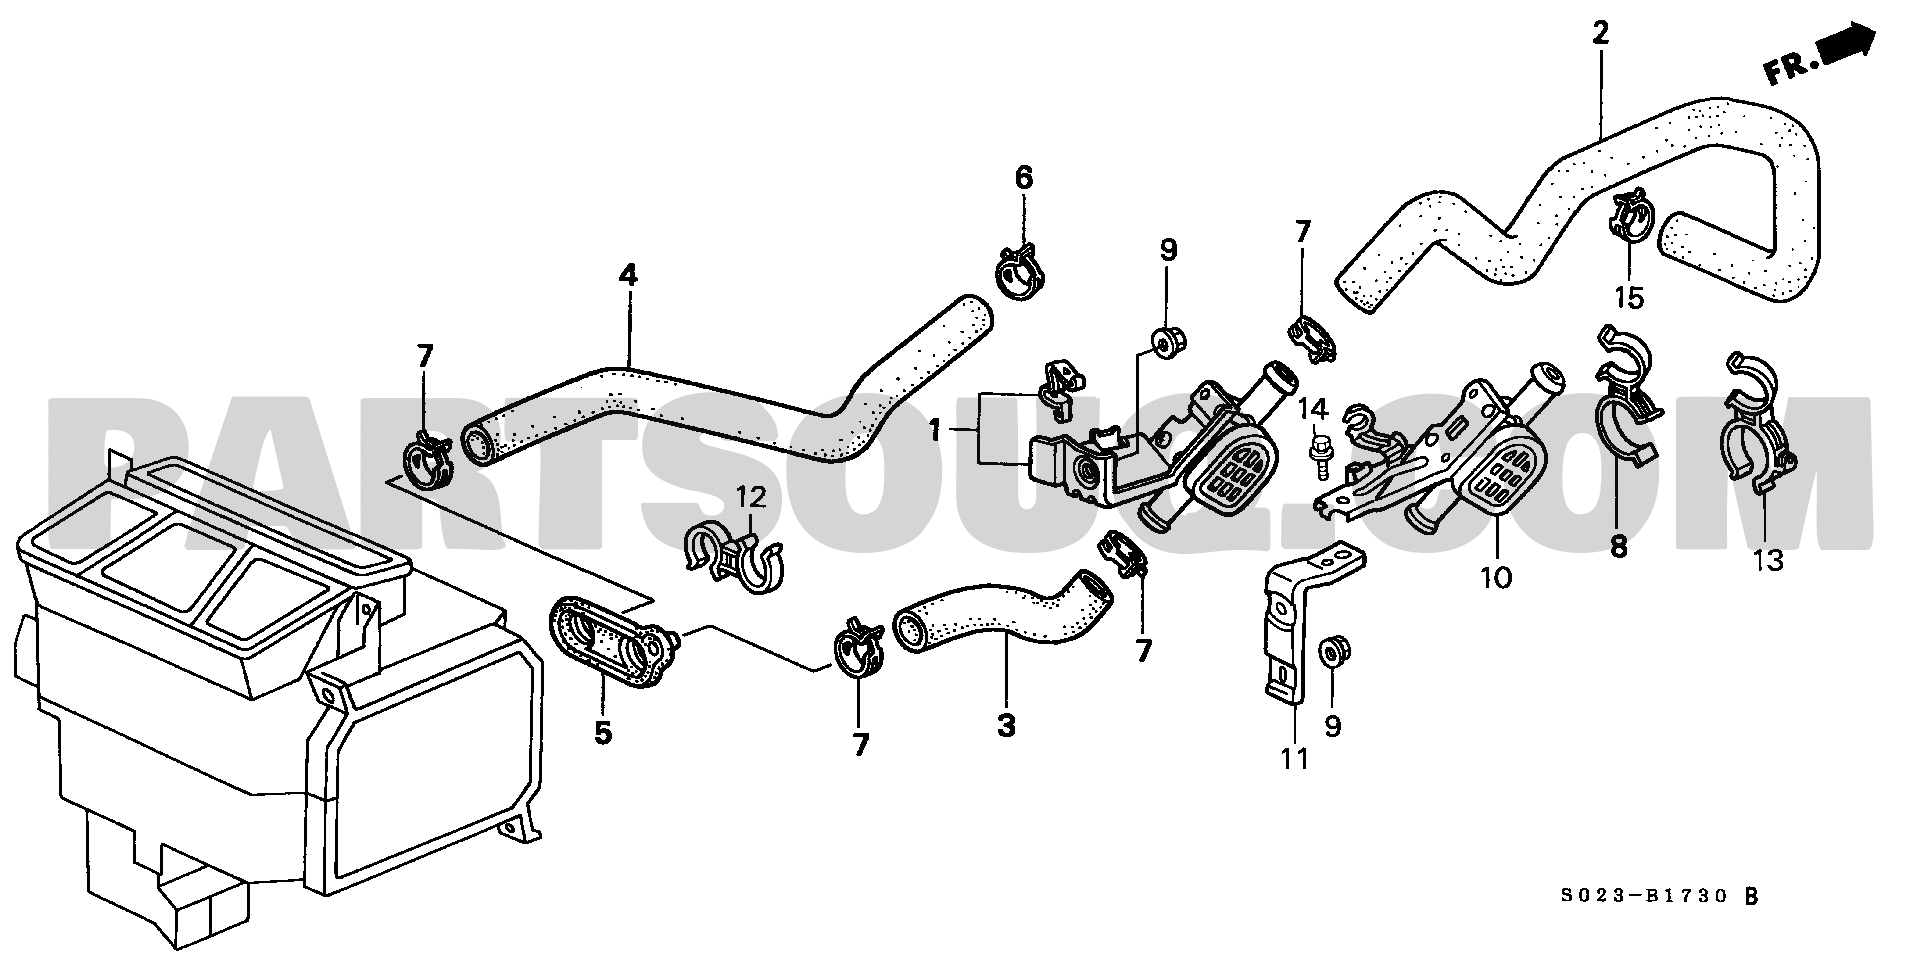 79725-S04-000 - Hose Water Outlet - 2000 Honda Civic